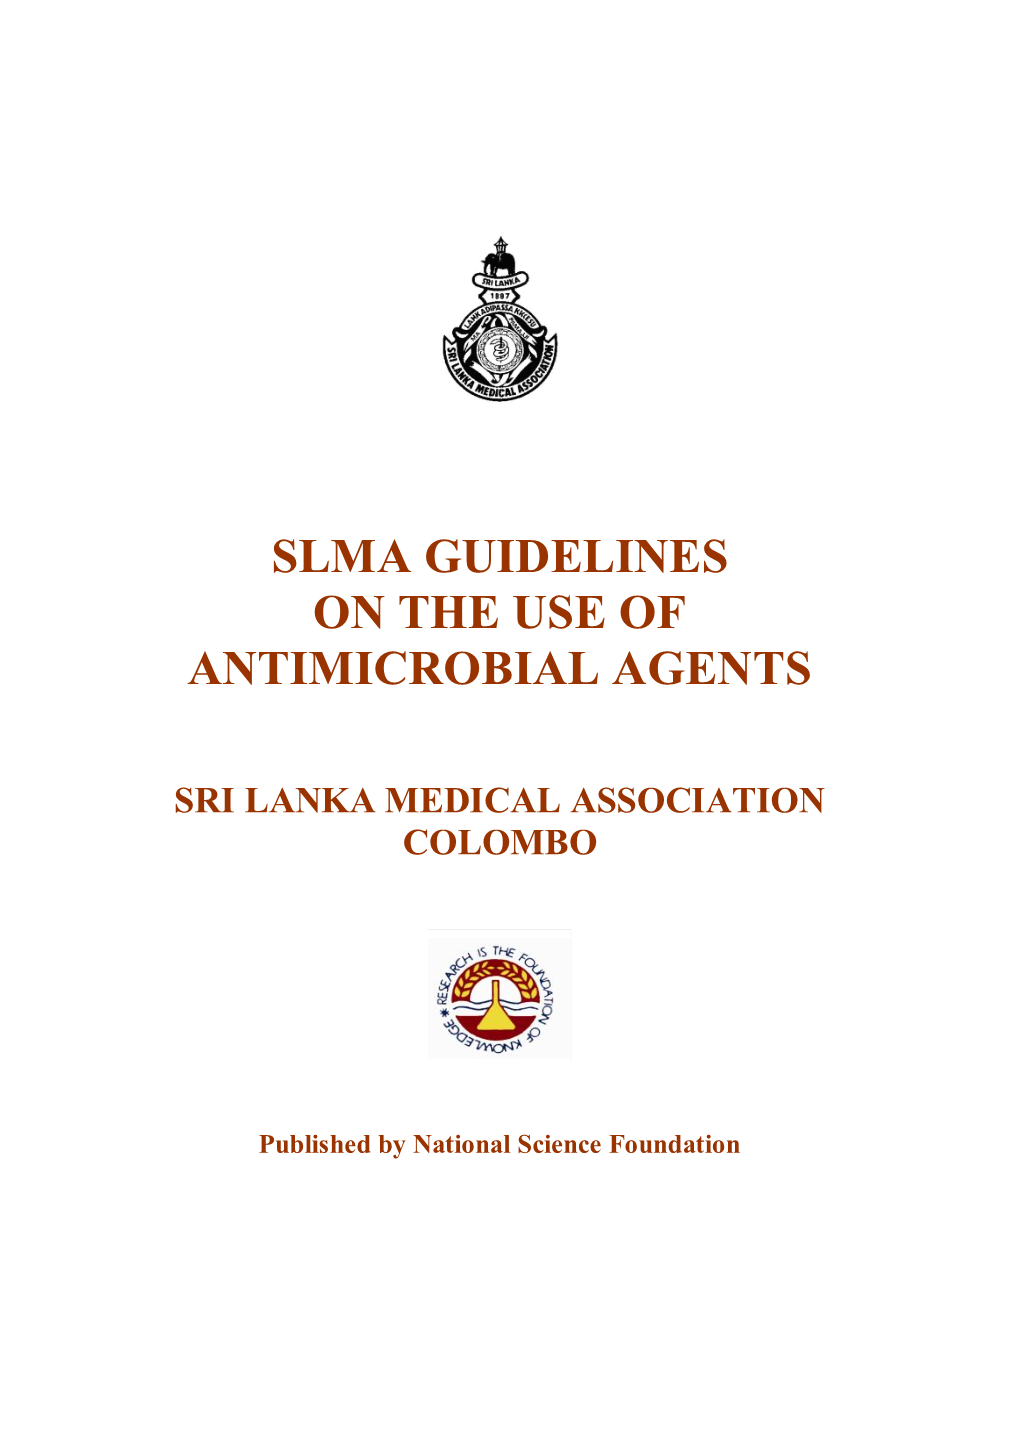 Slma Guidelines on the Use of Antimicrobial Agents